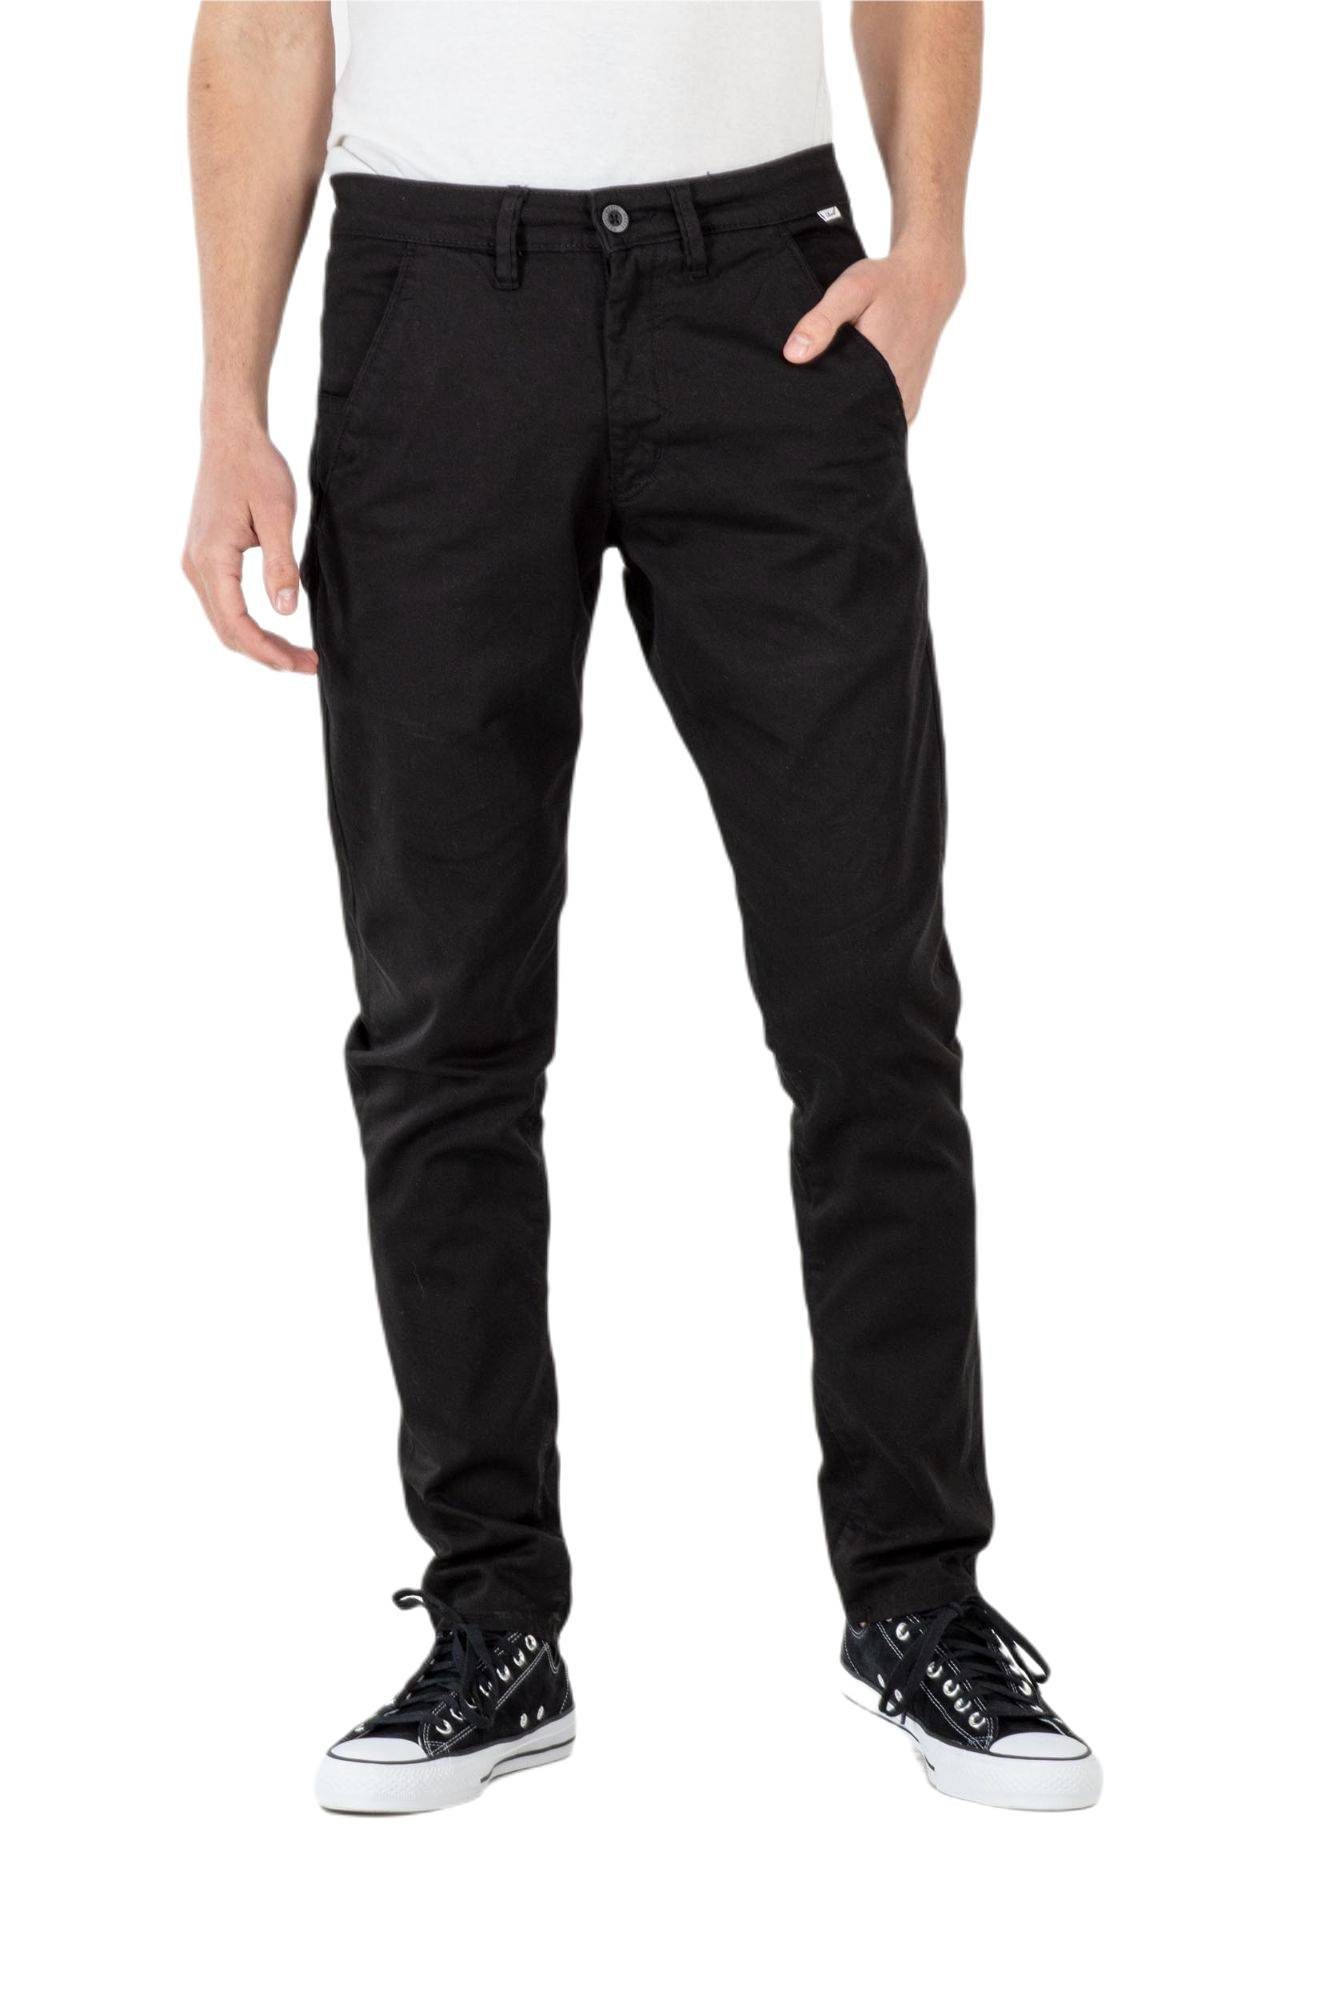 REELL Chinohose Hose Reell Flex Tapered Chino